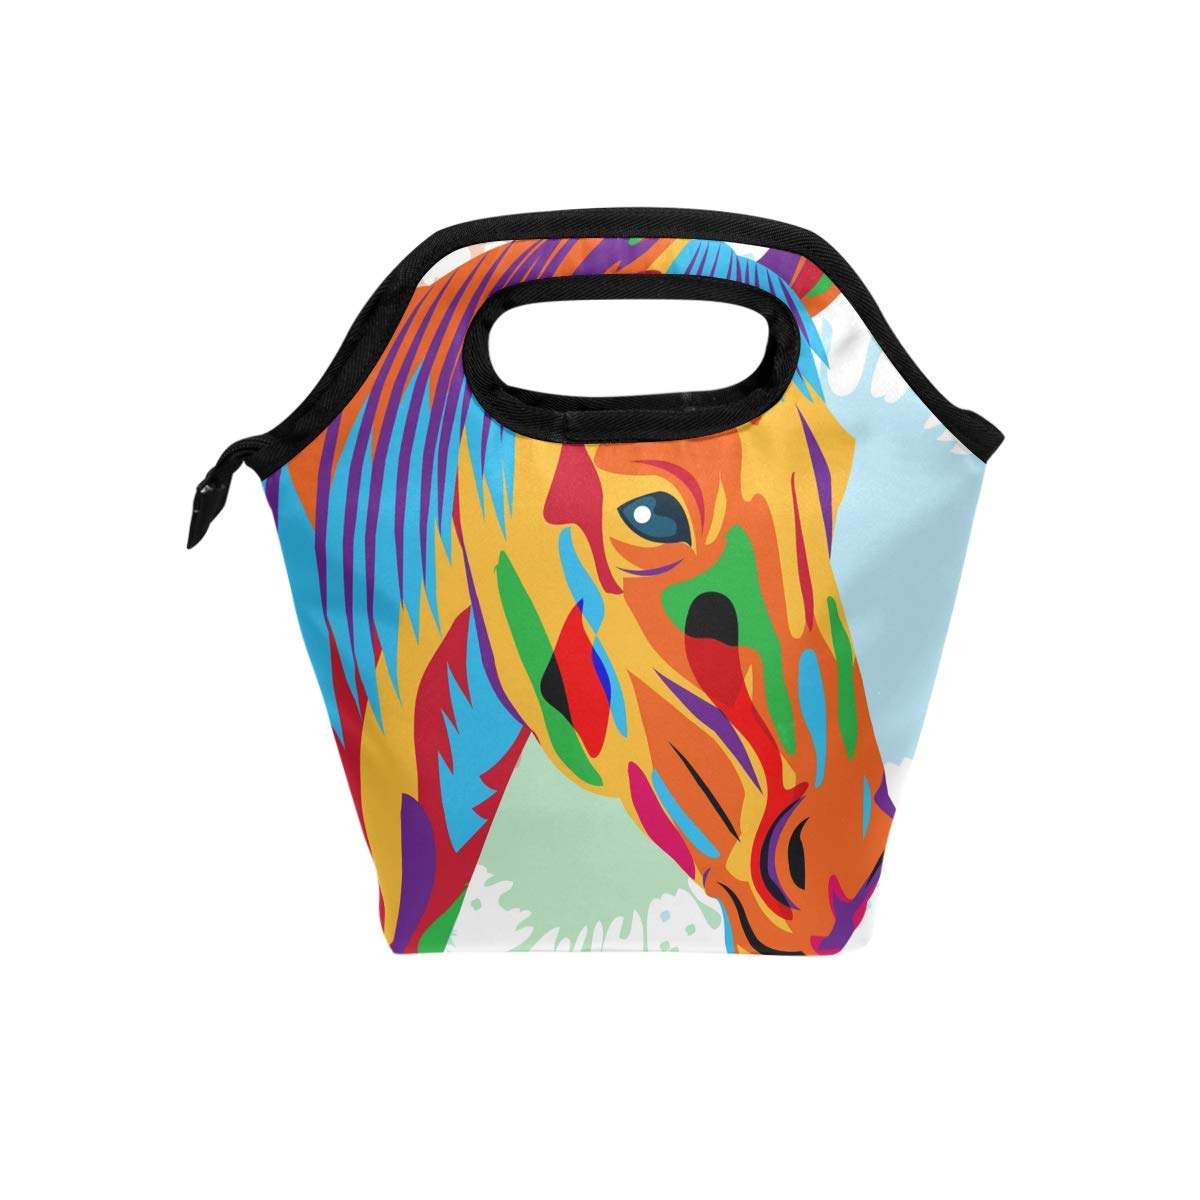 Amazon.com: Painted Horse Lunch Bag Tote Bag Lunch Handbags.